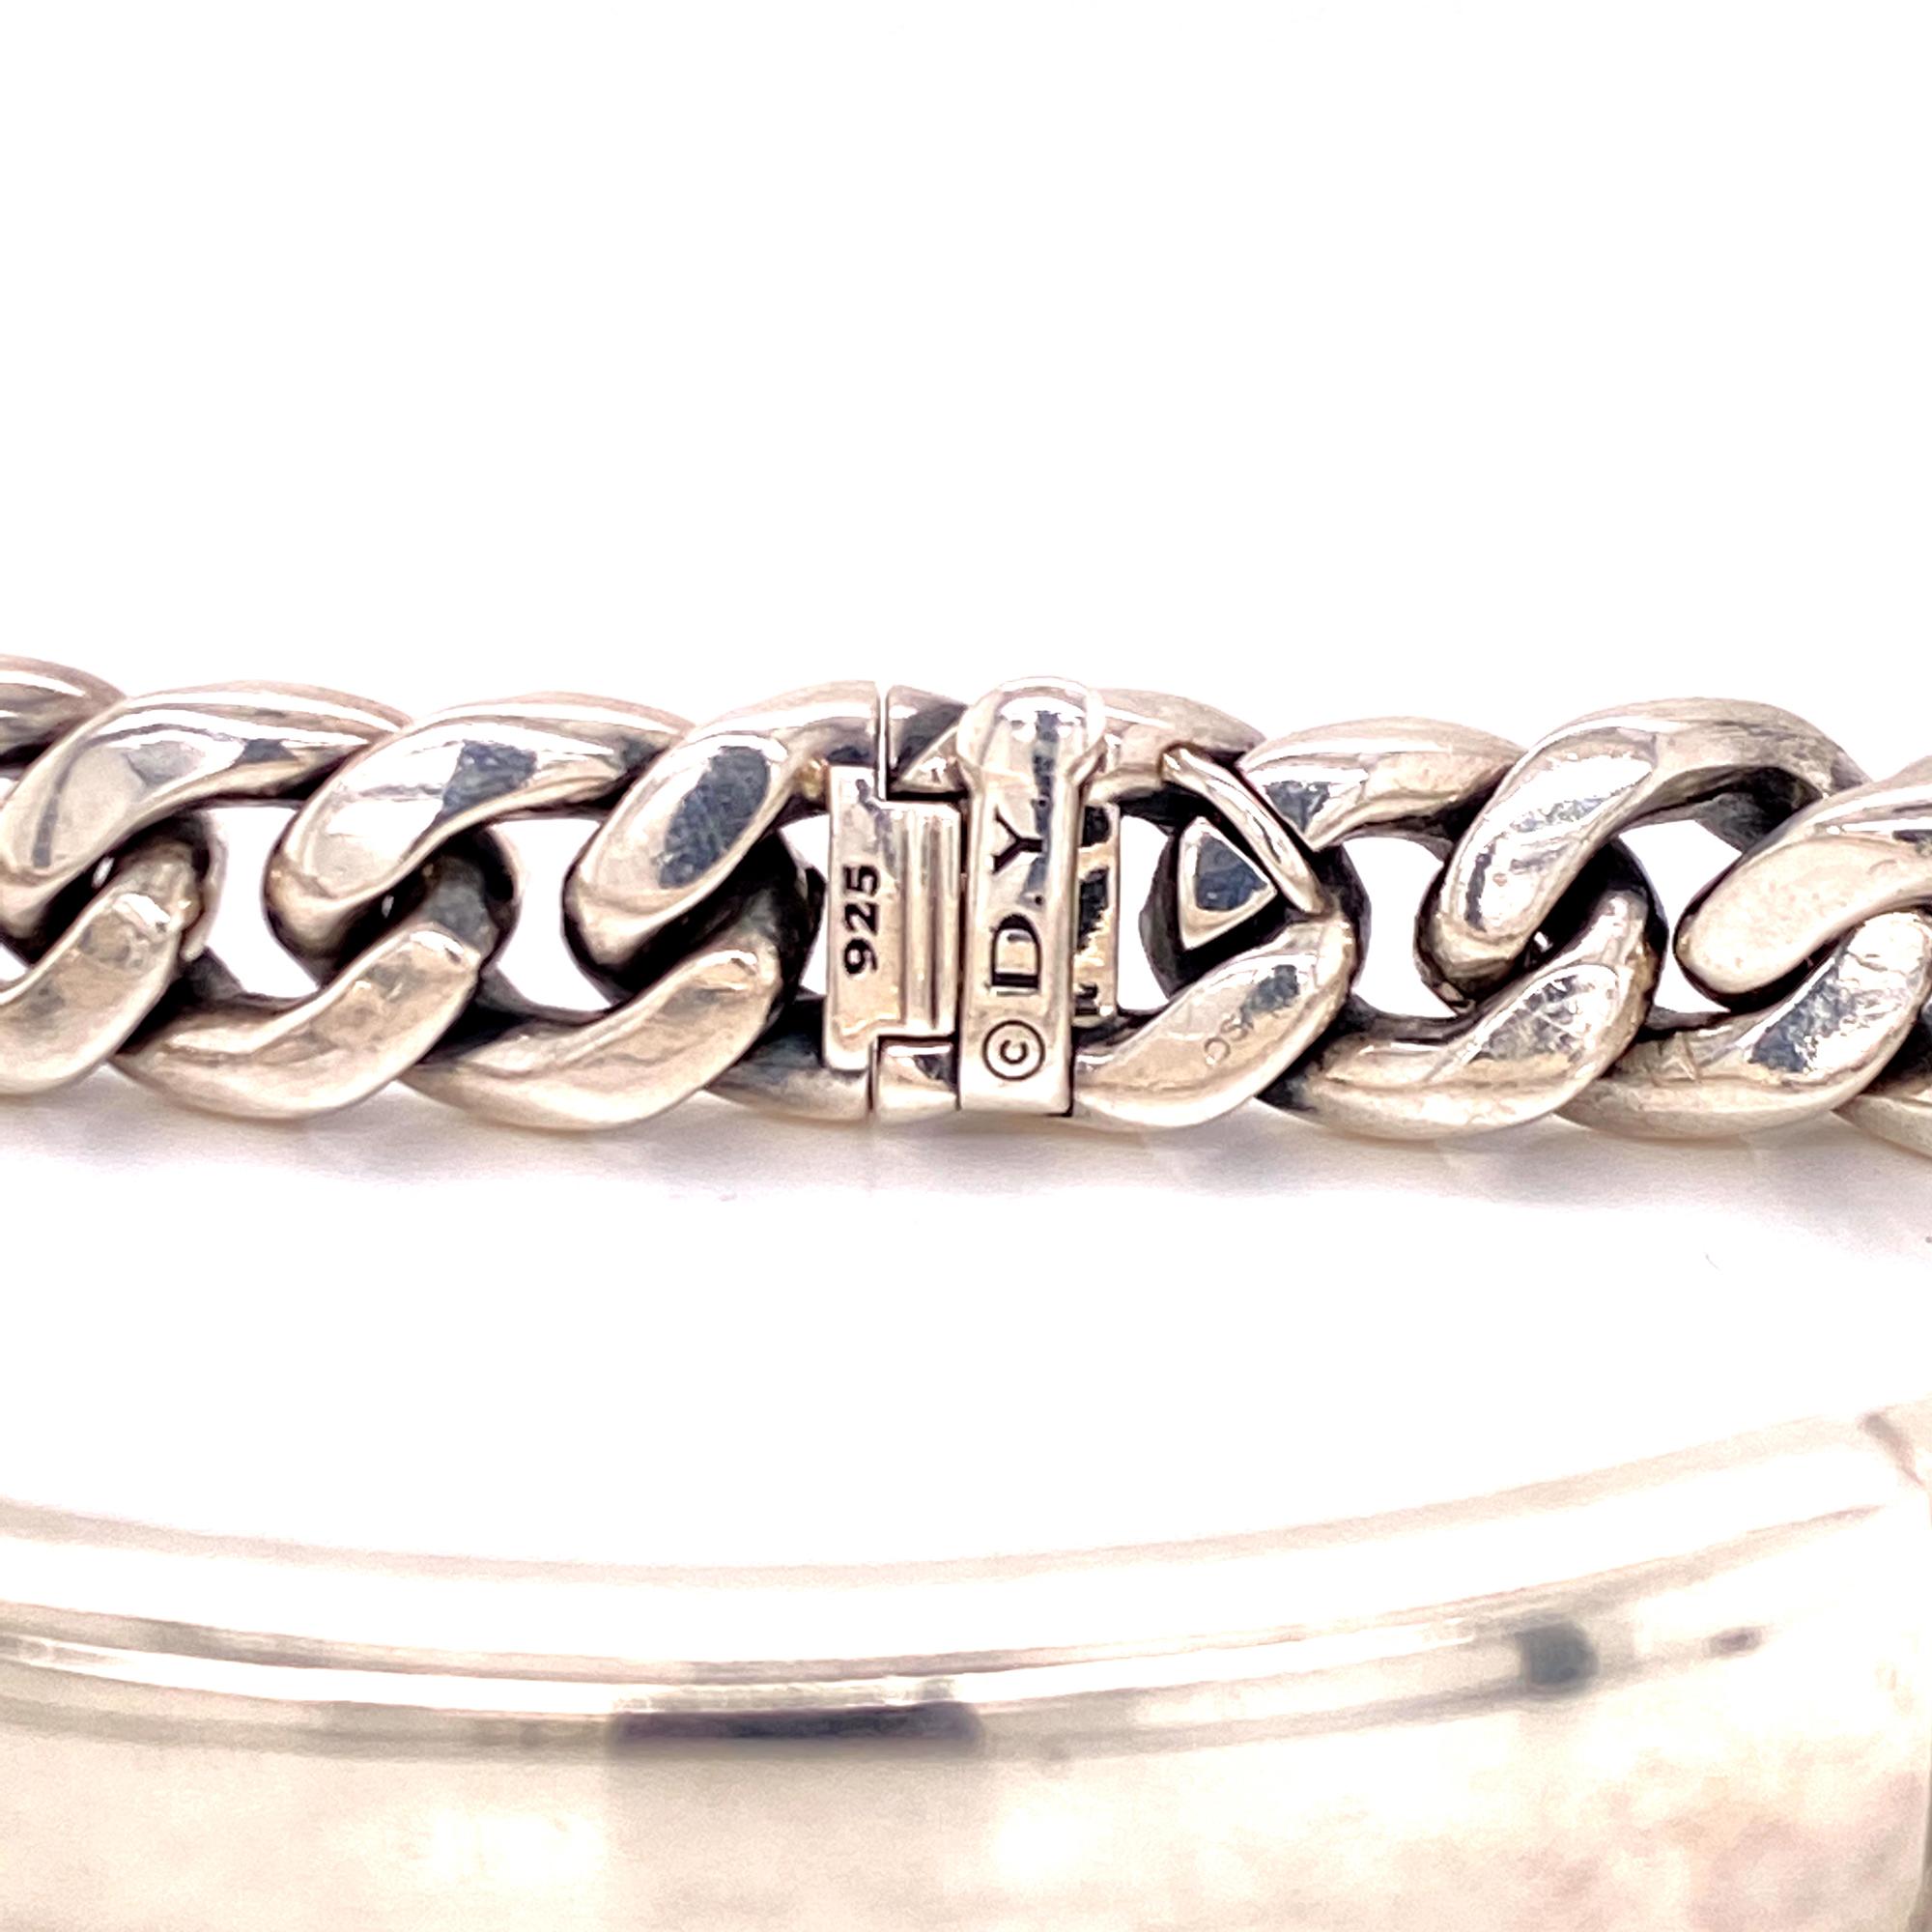 Sterling silver ID bracelet by David Yurman. The bracelet measures 8.25 inches in length and approximately .50 inches in width. Signed DY 925.